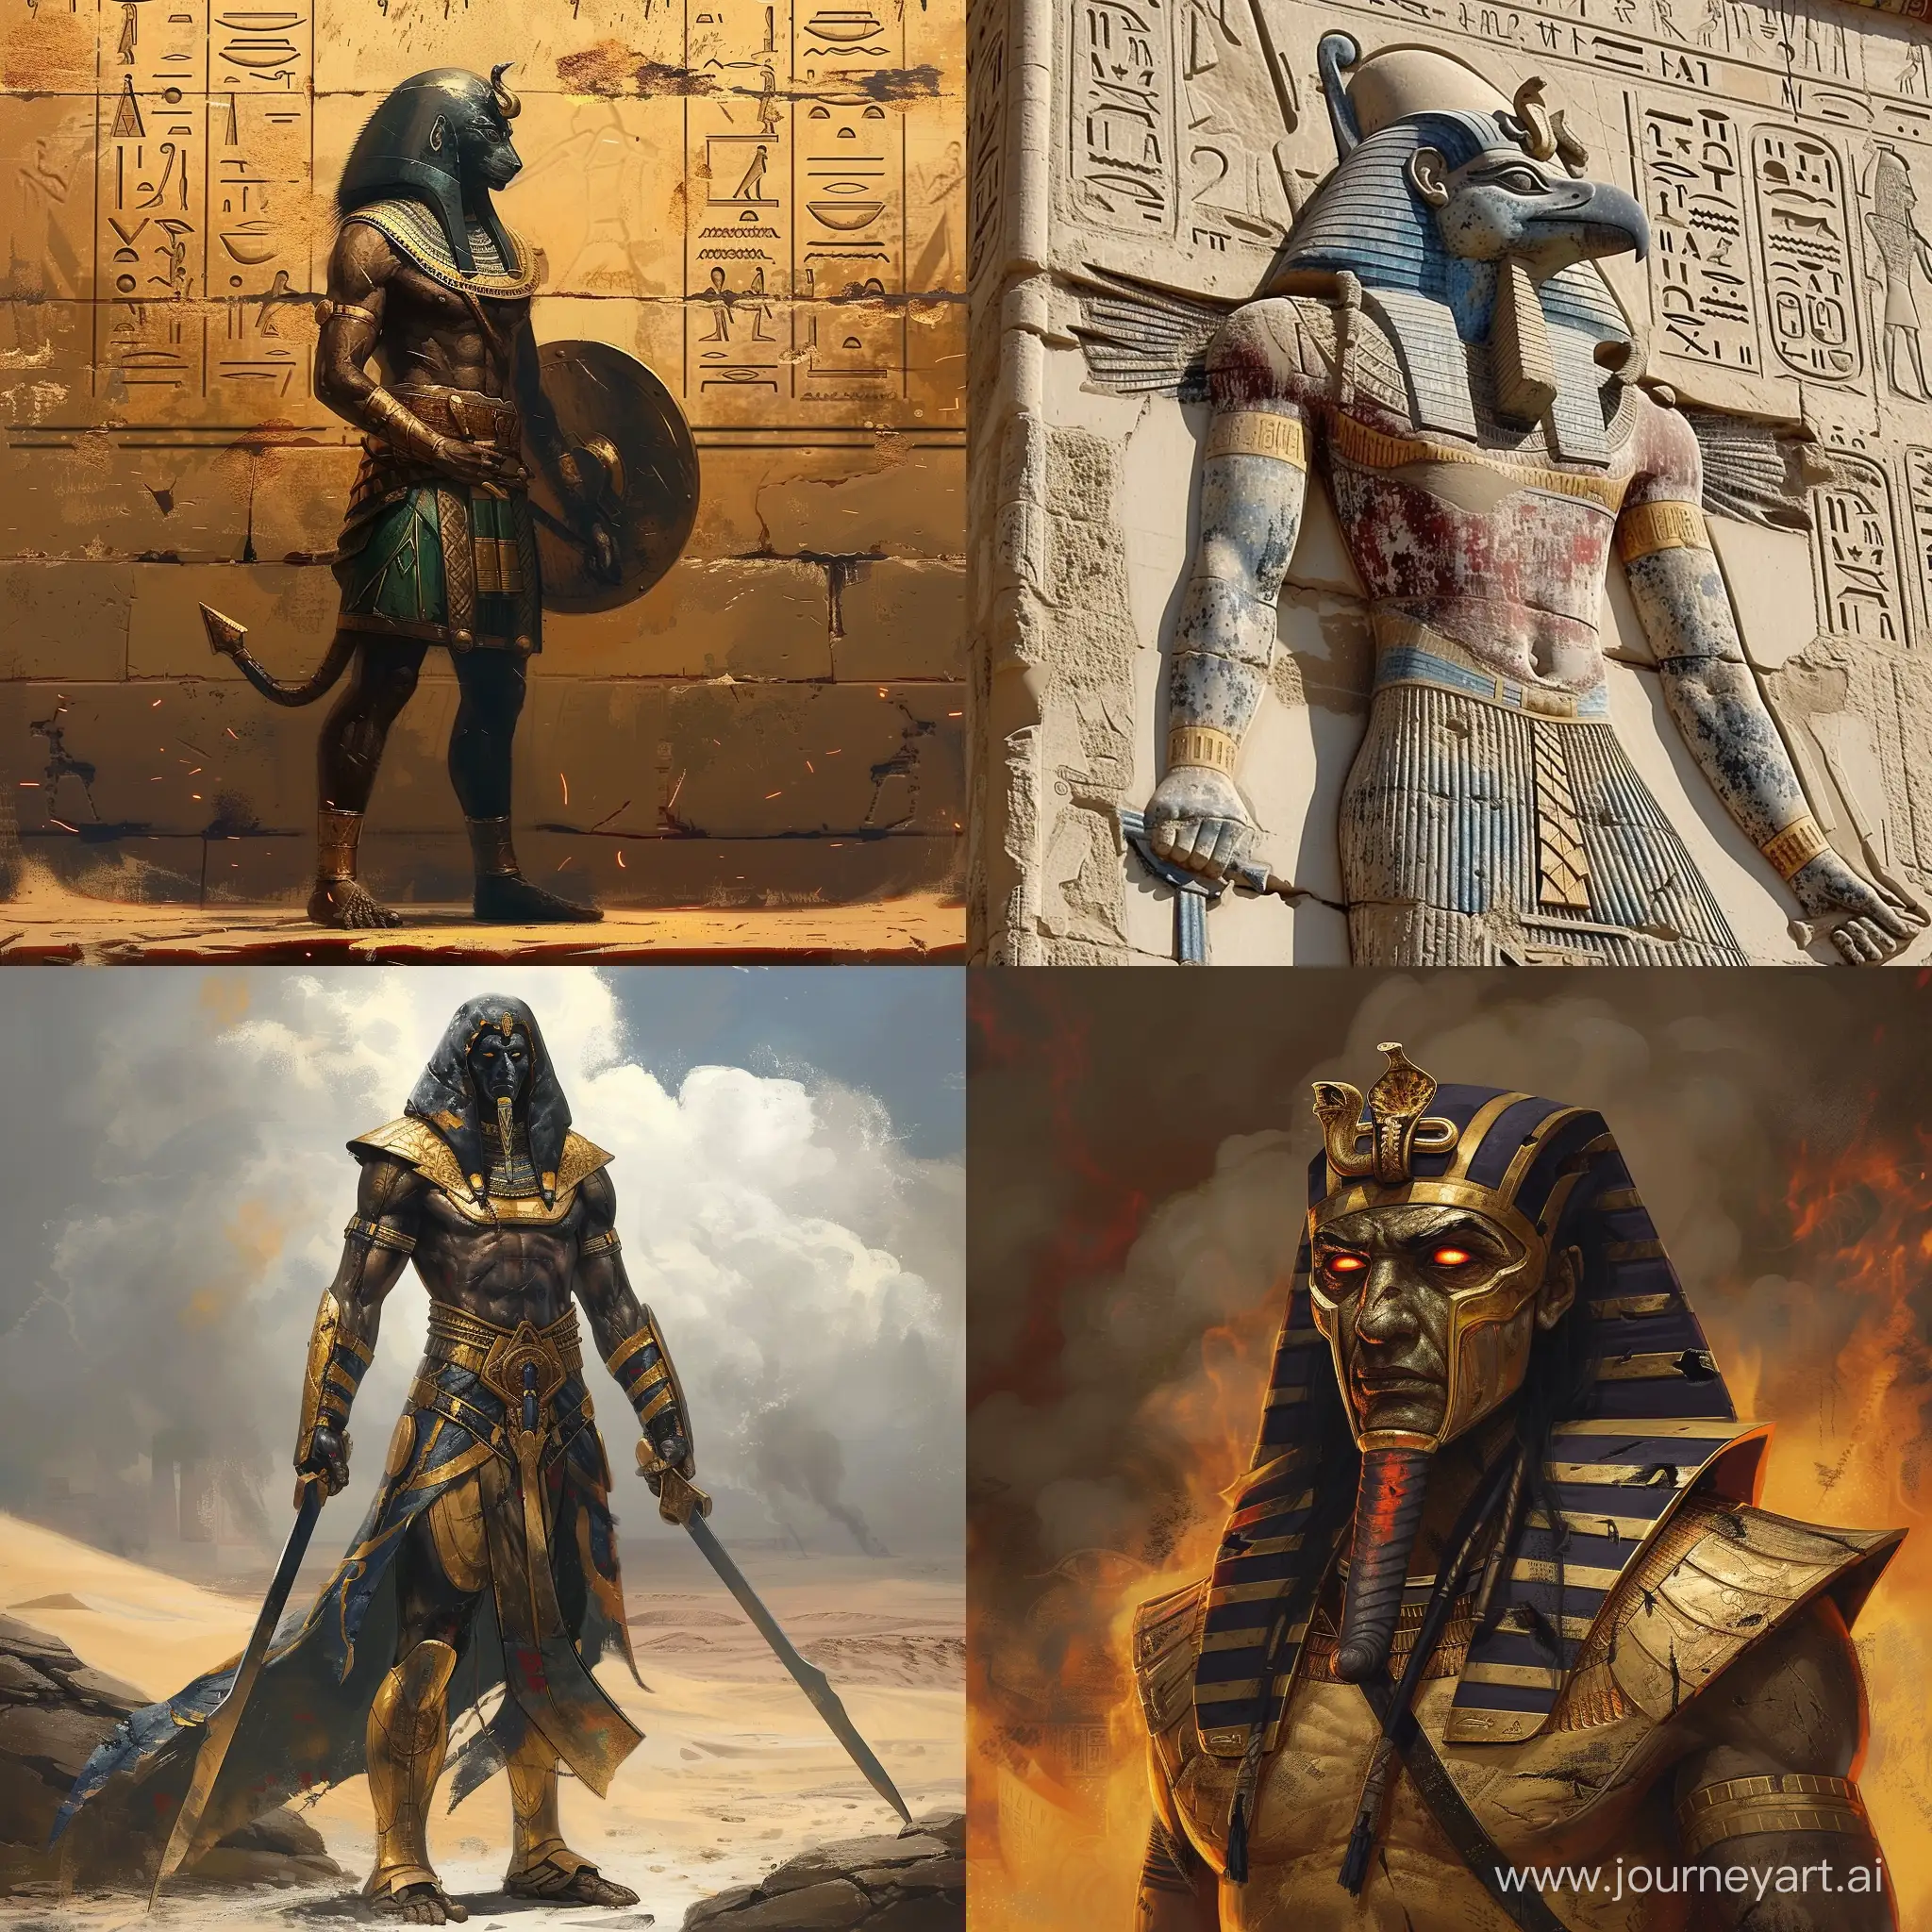 Mythical-Confrontation-God-of-War-in-Ancient-Egyptian-Setting